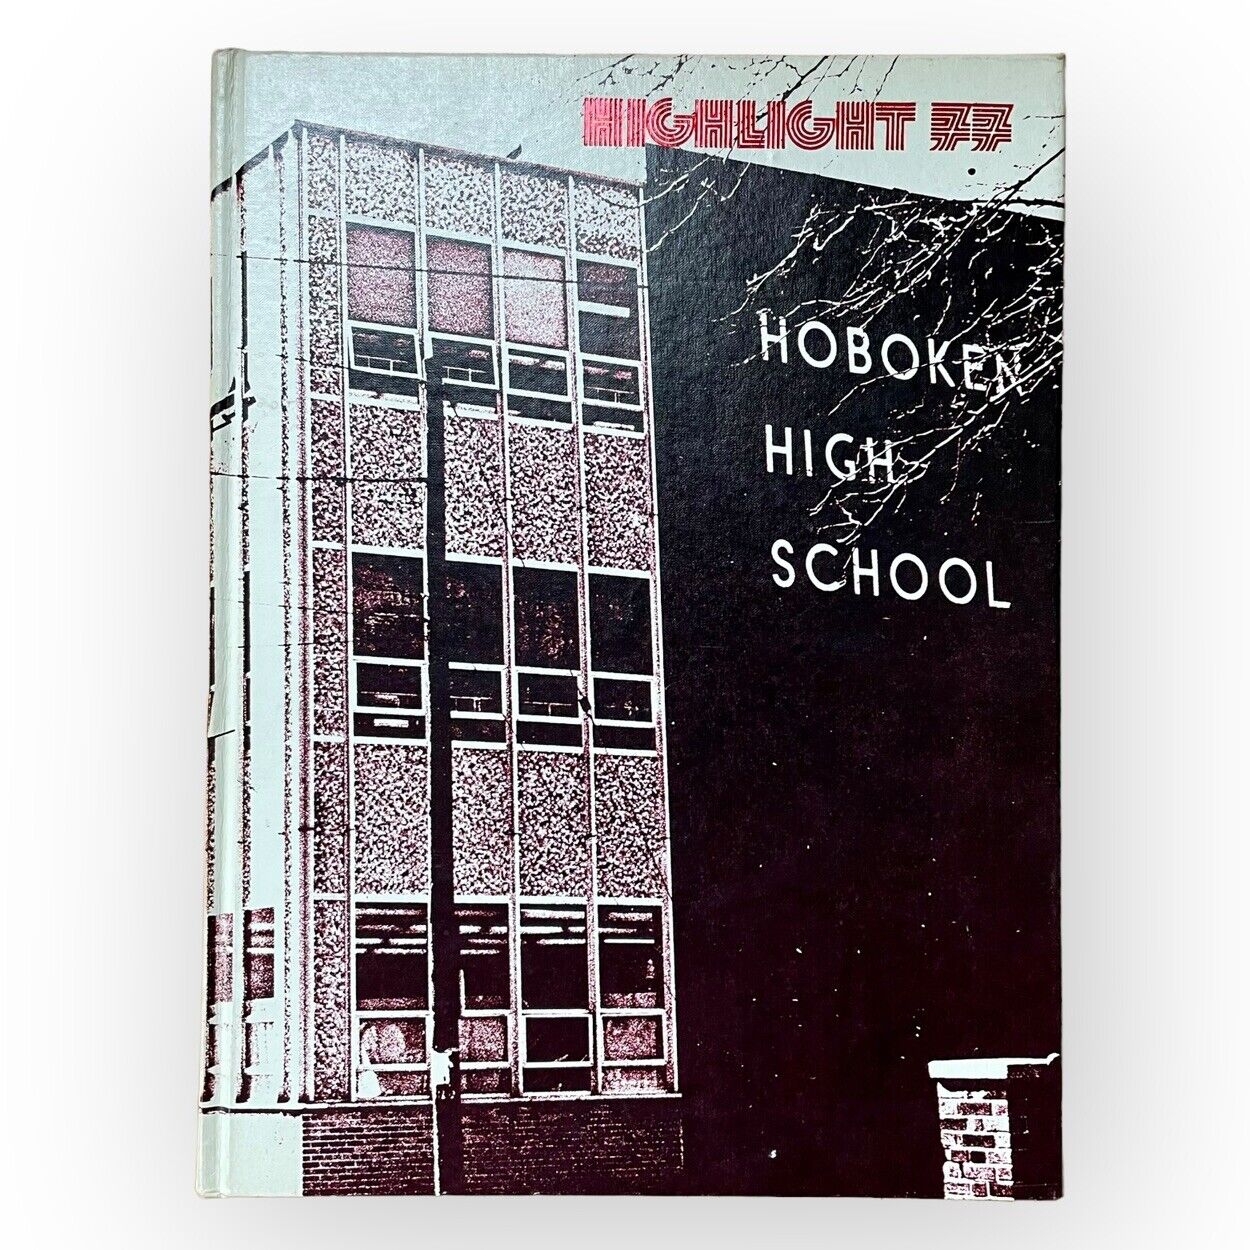 Hoboken High School Yearbook 1977 “Highlight 77” Unmarked Hardcover 188 Pages